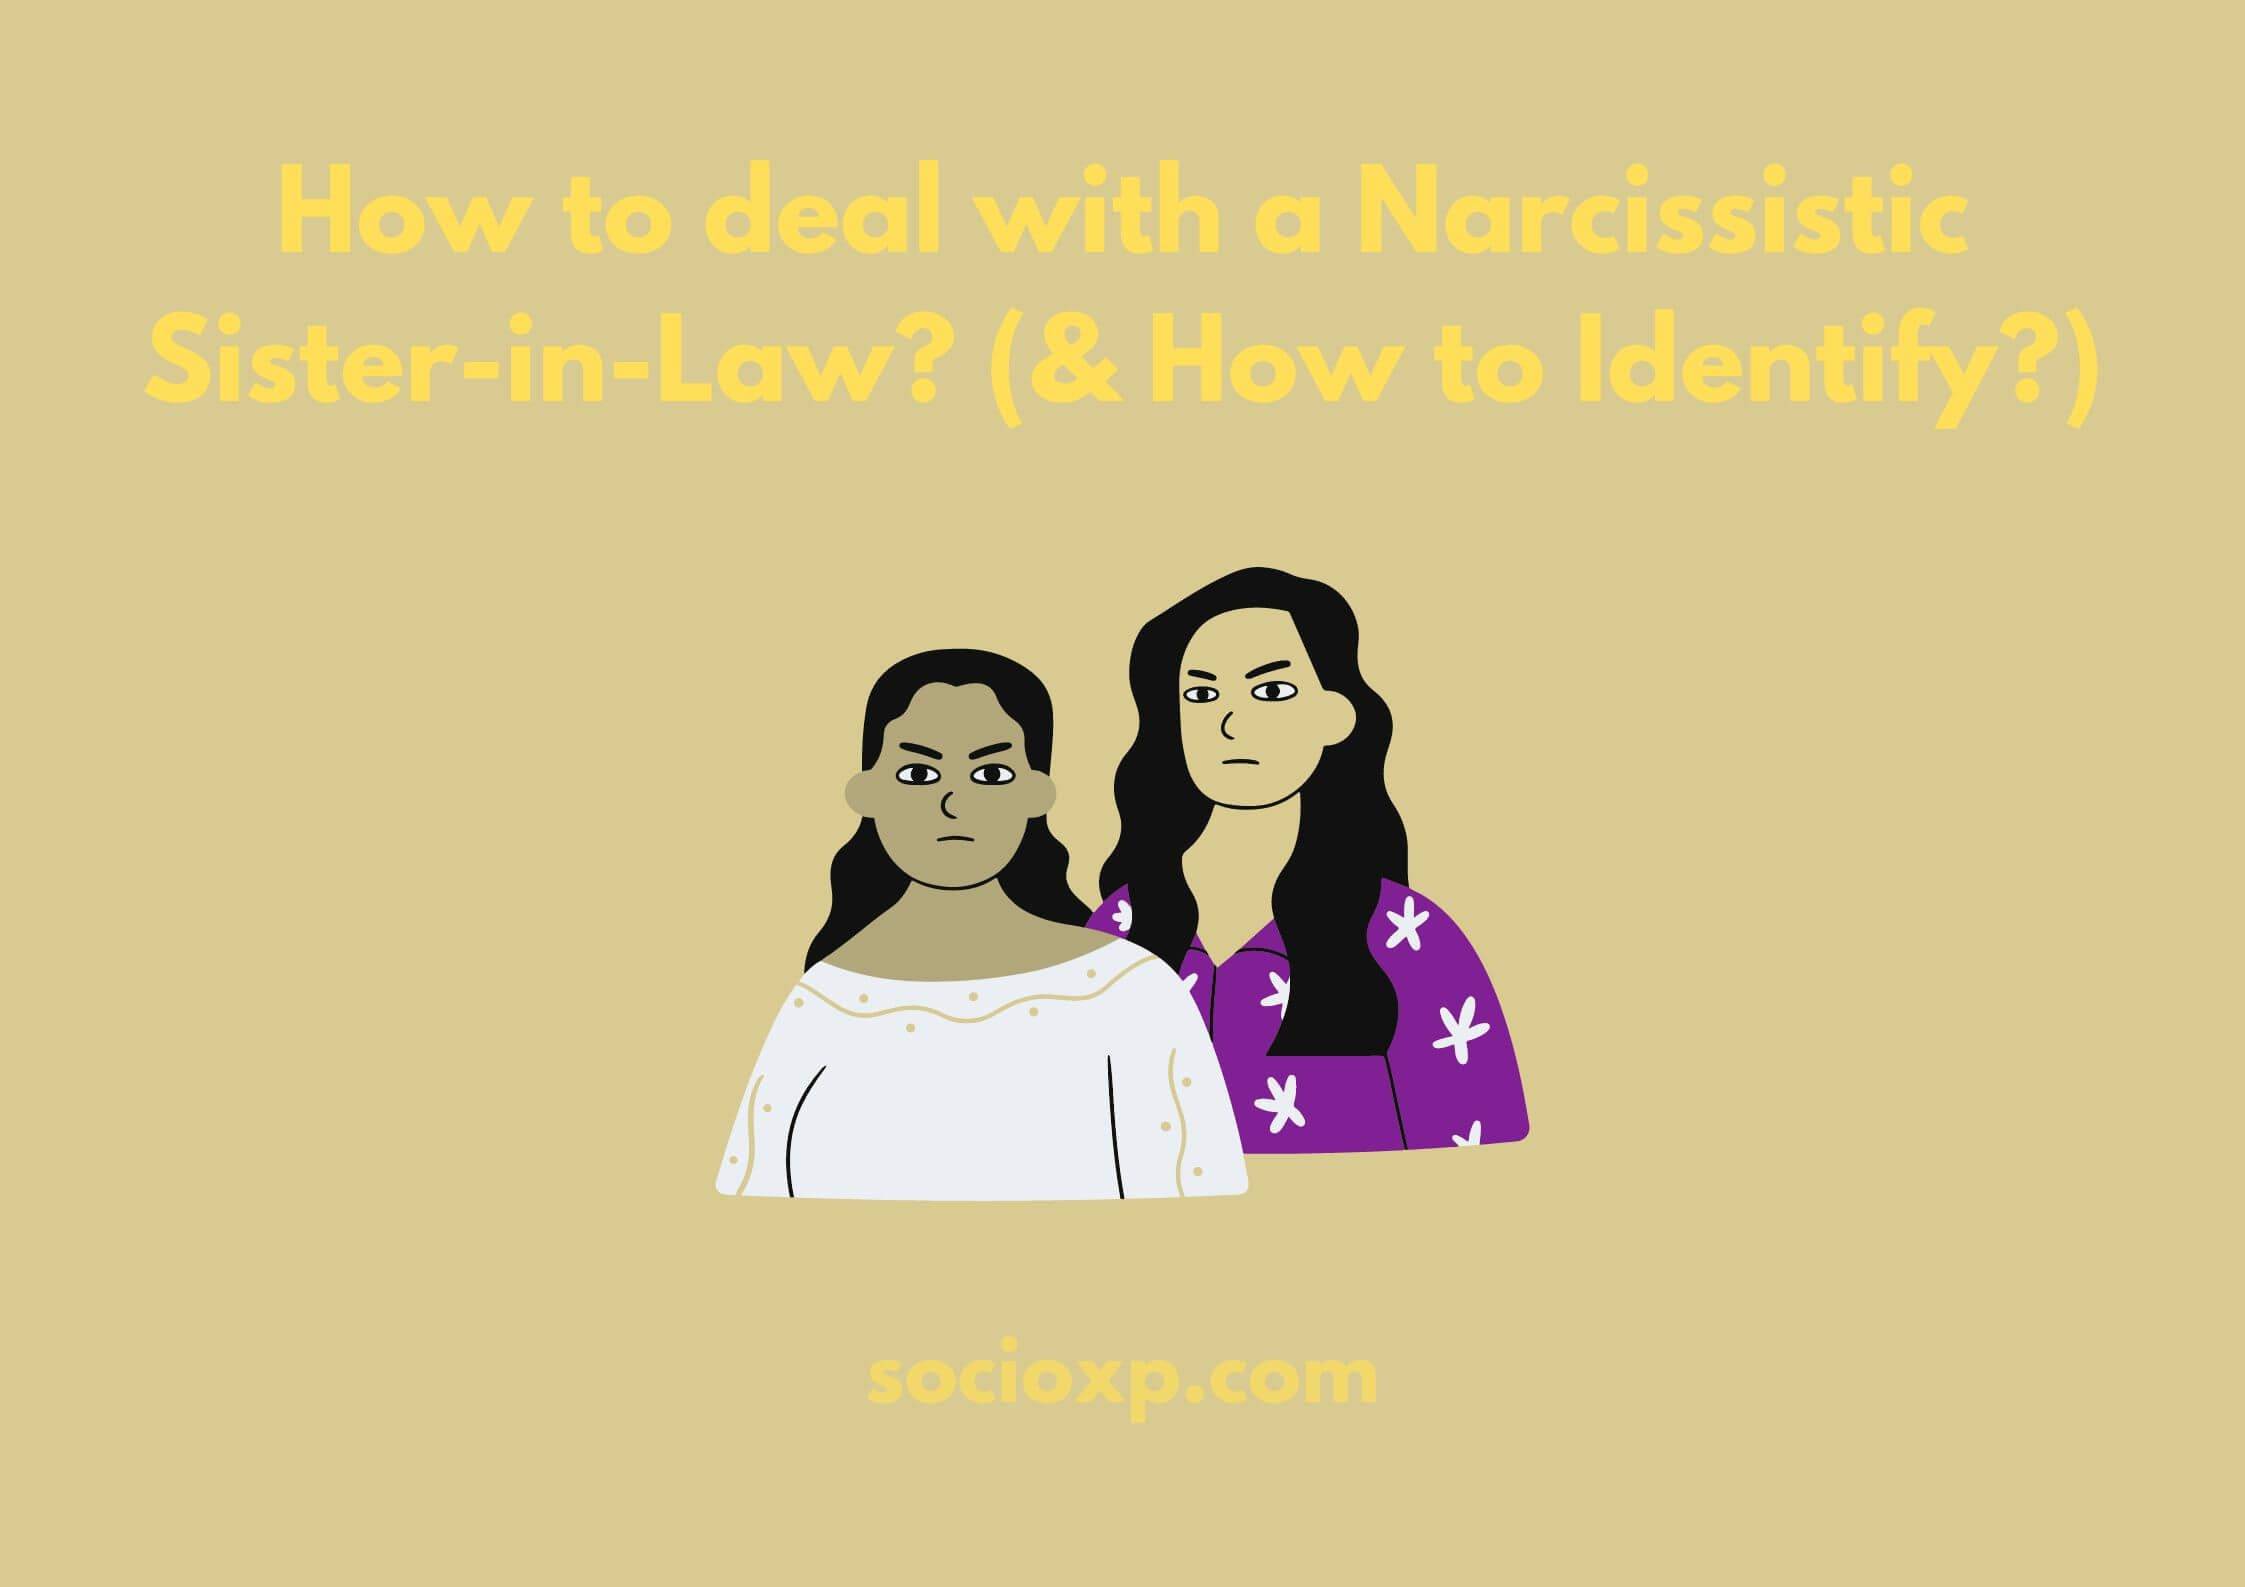 How to deal with a Narcissistic Sister-in-Law? (& How to Identify?)